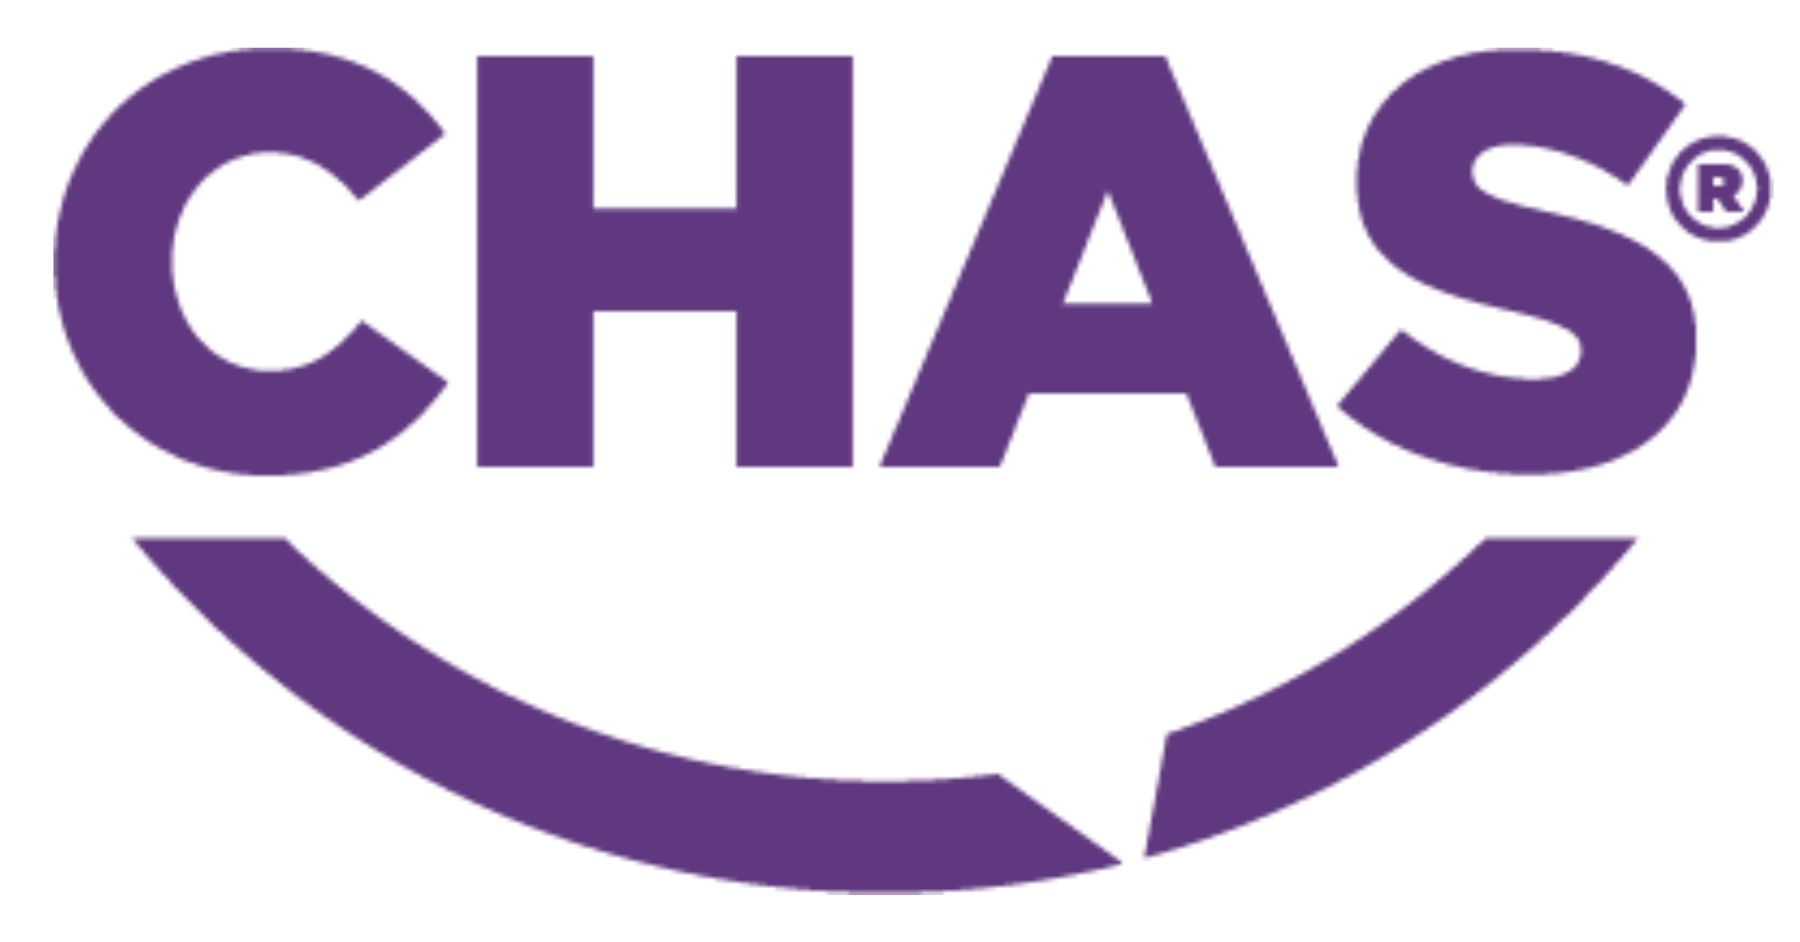 Transwaste achieve compliance against the CHAS standard